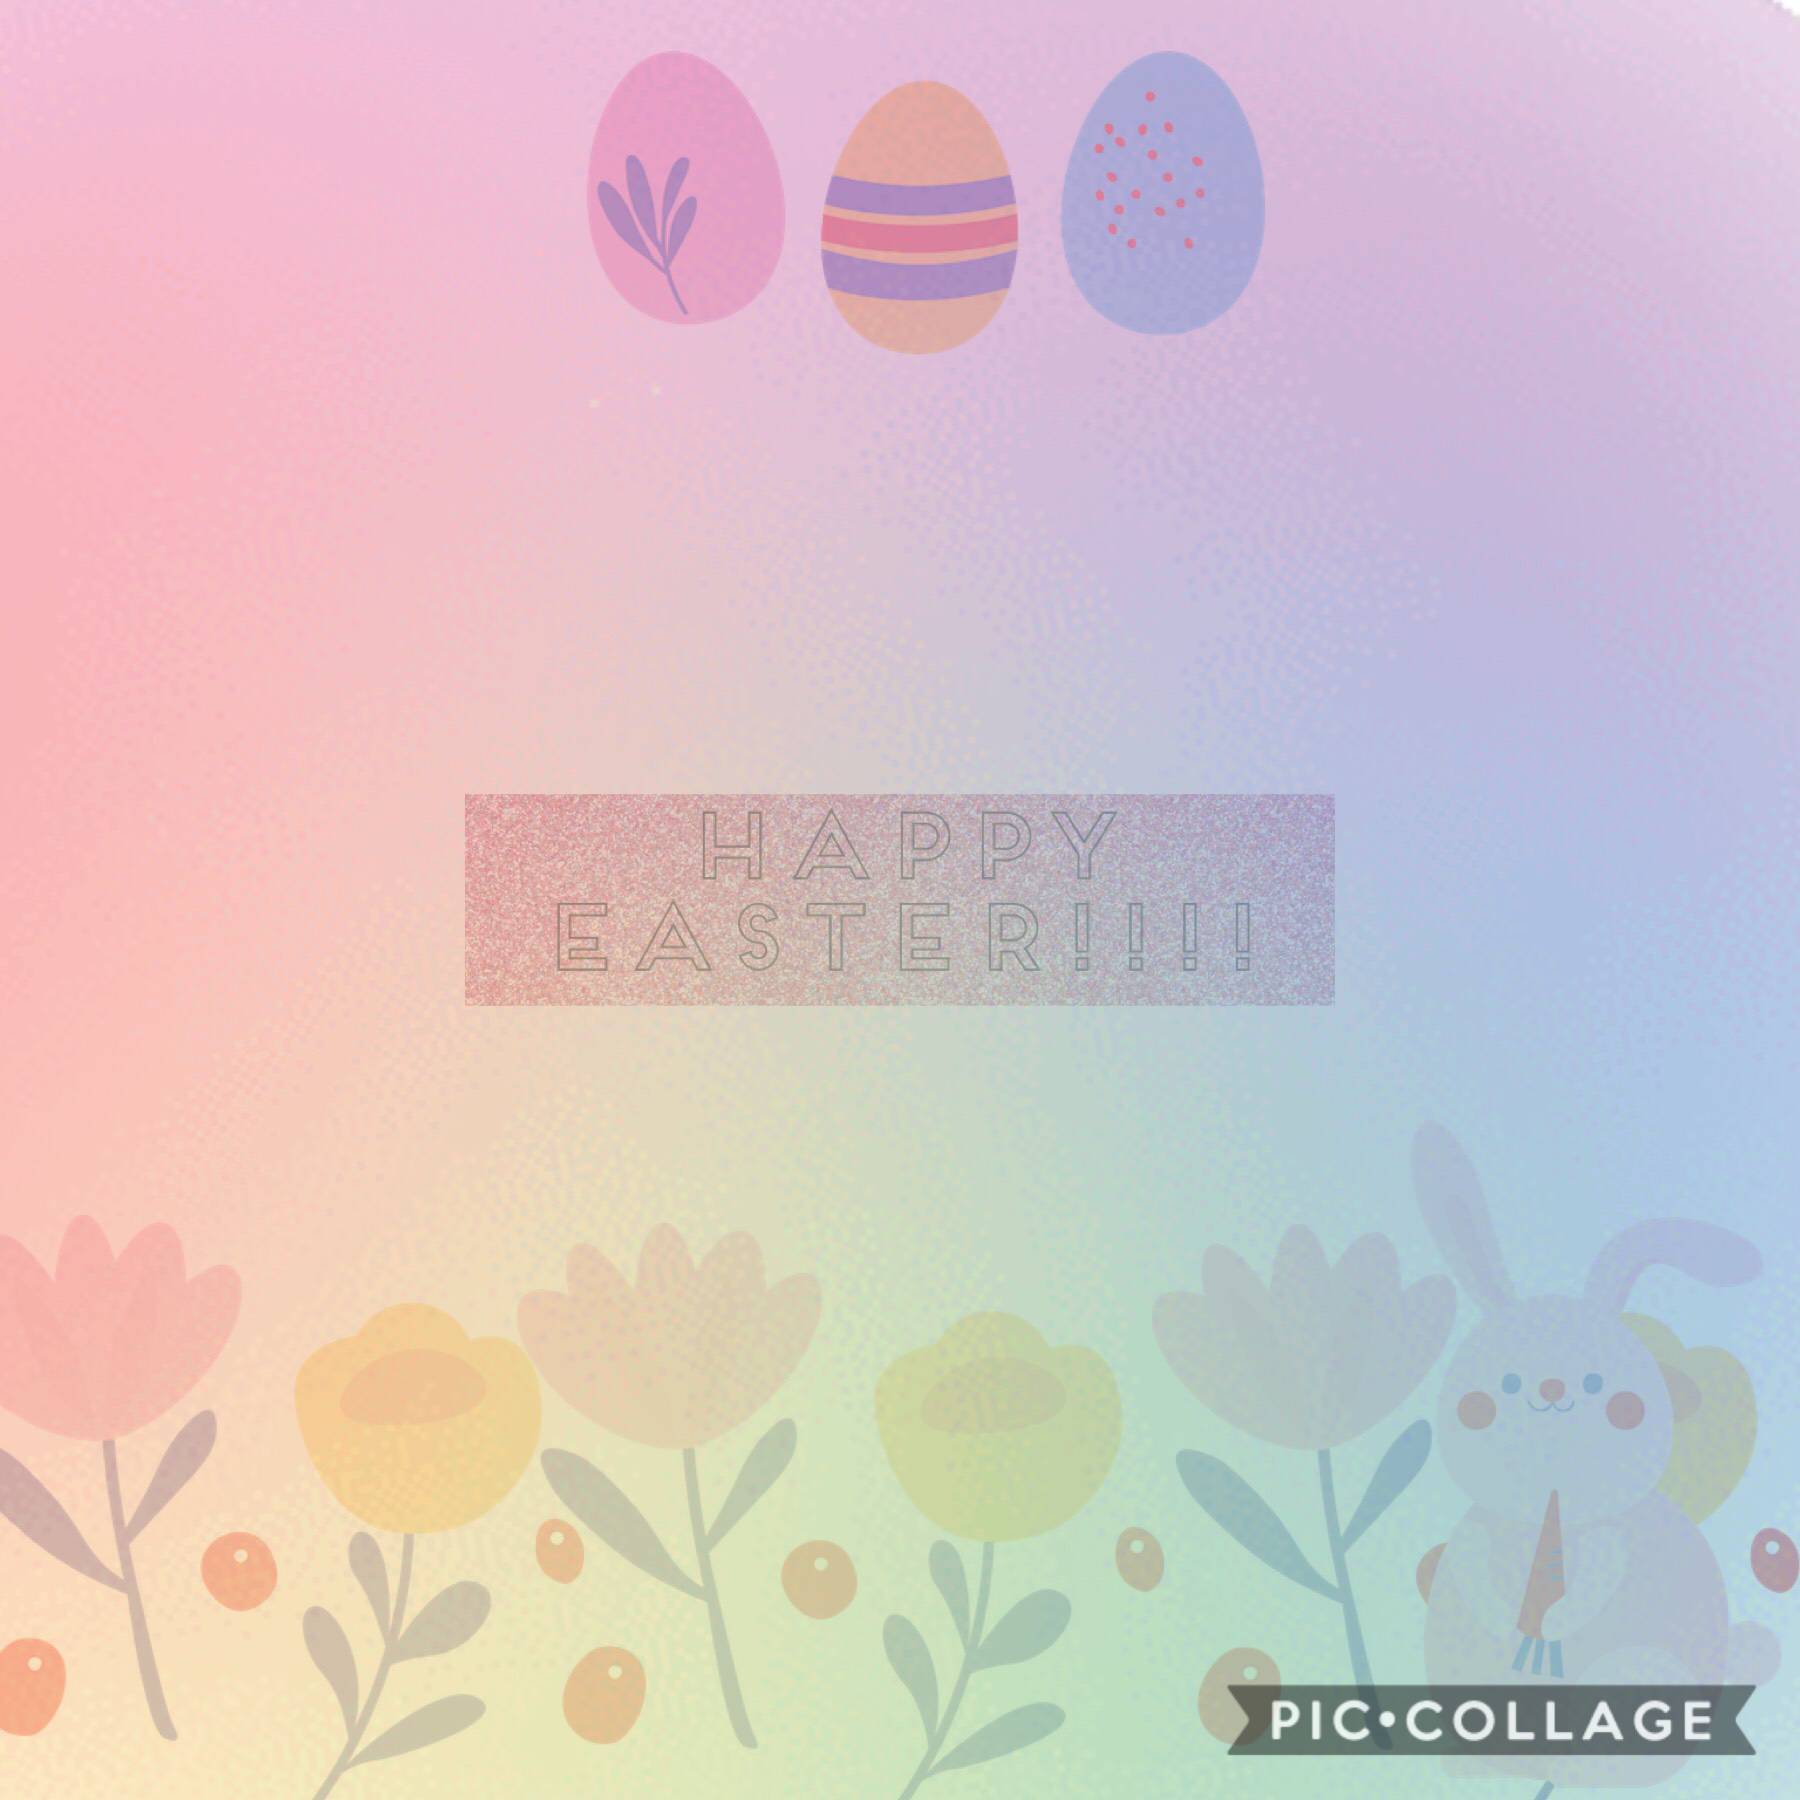 Happy Easter and Passover!!!